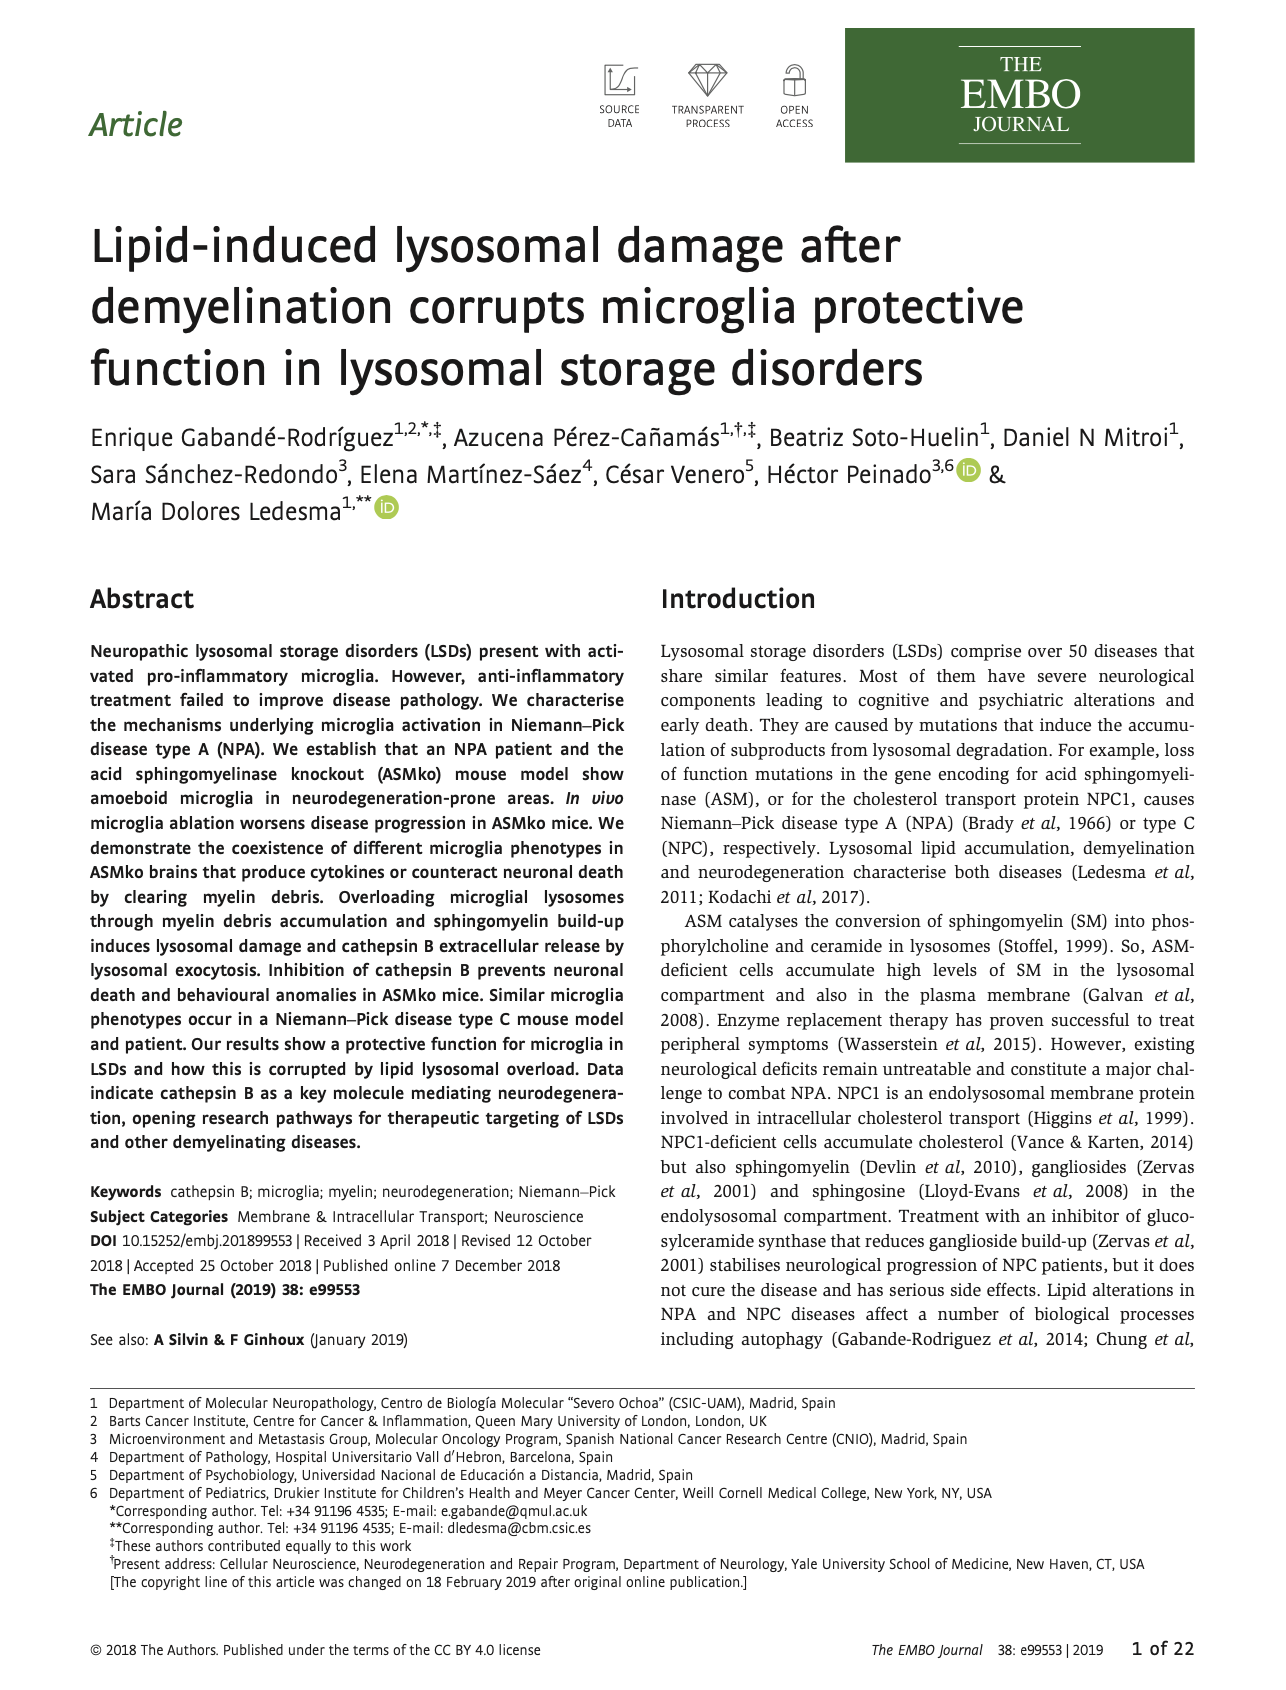 Lipid-induced lysosomal damage after demyelination corrupts microglia protective function in lysosomal storage disorders